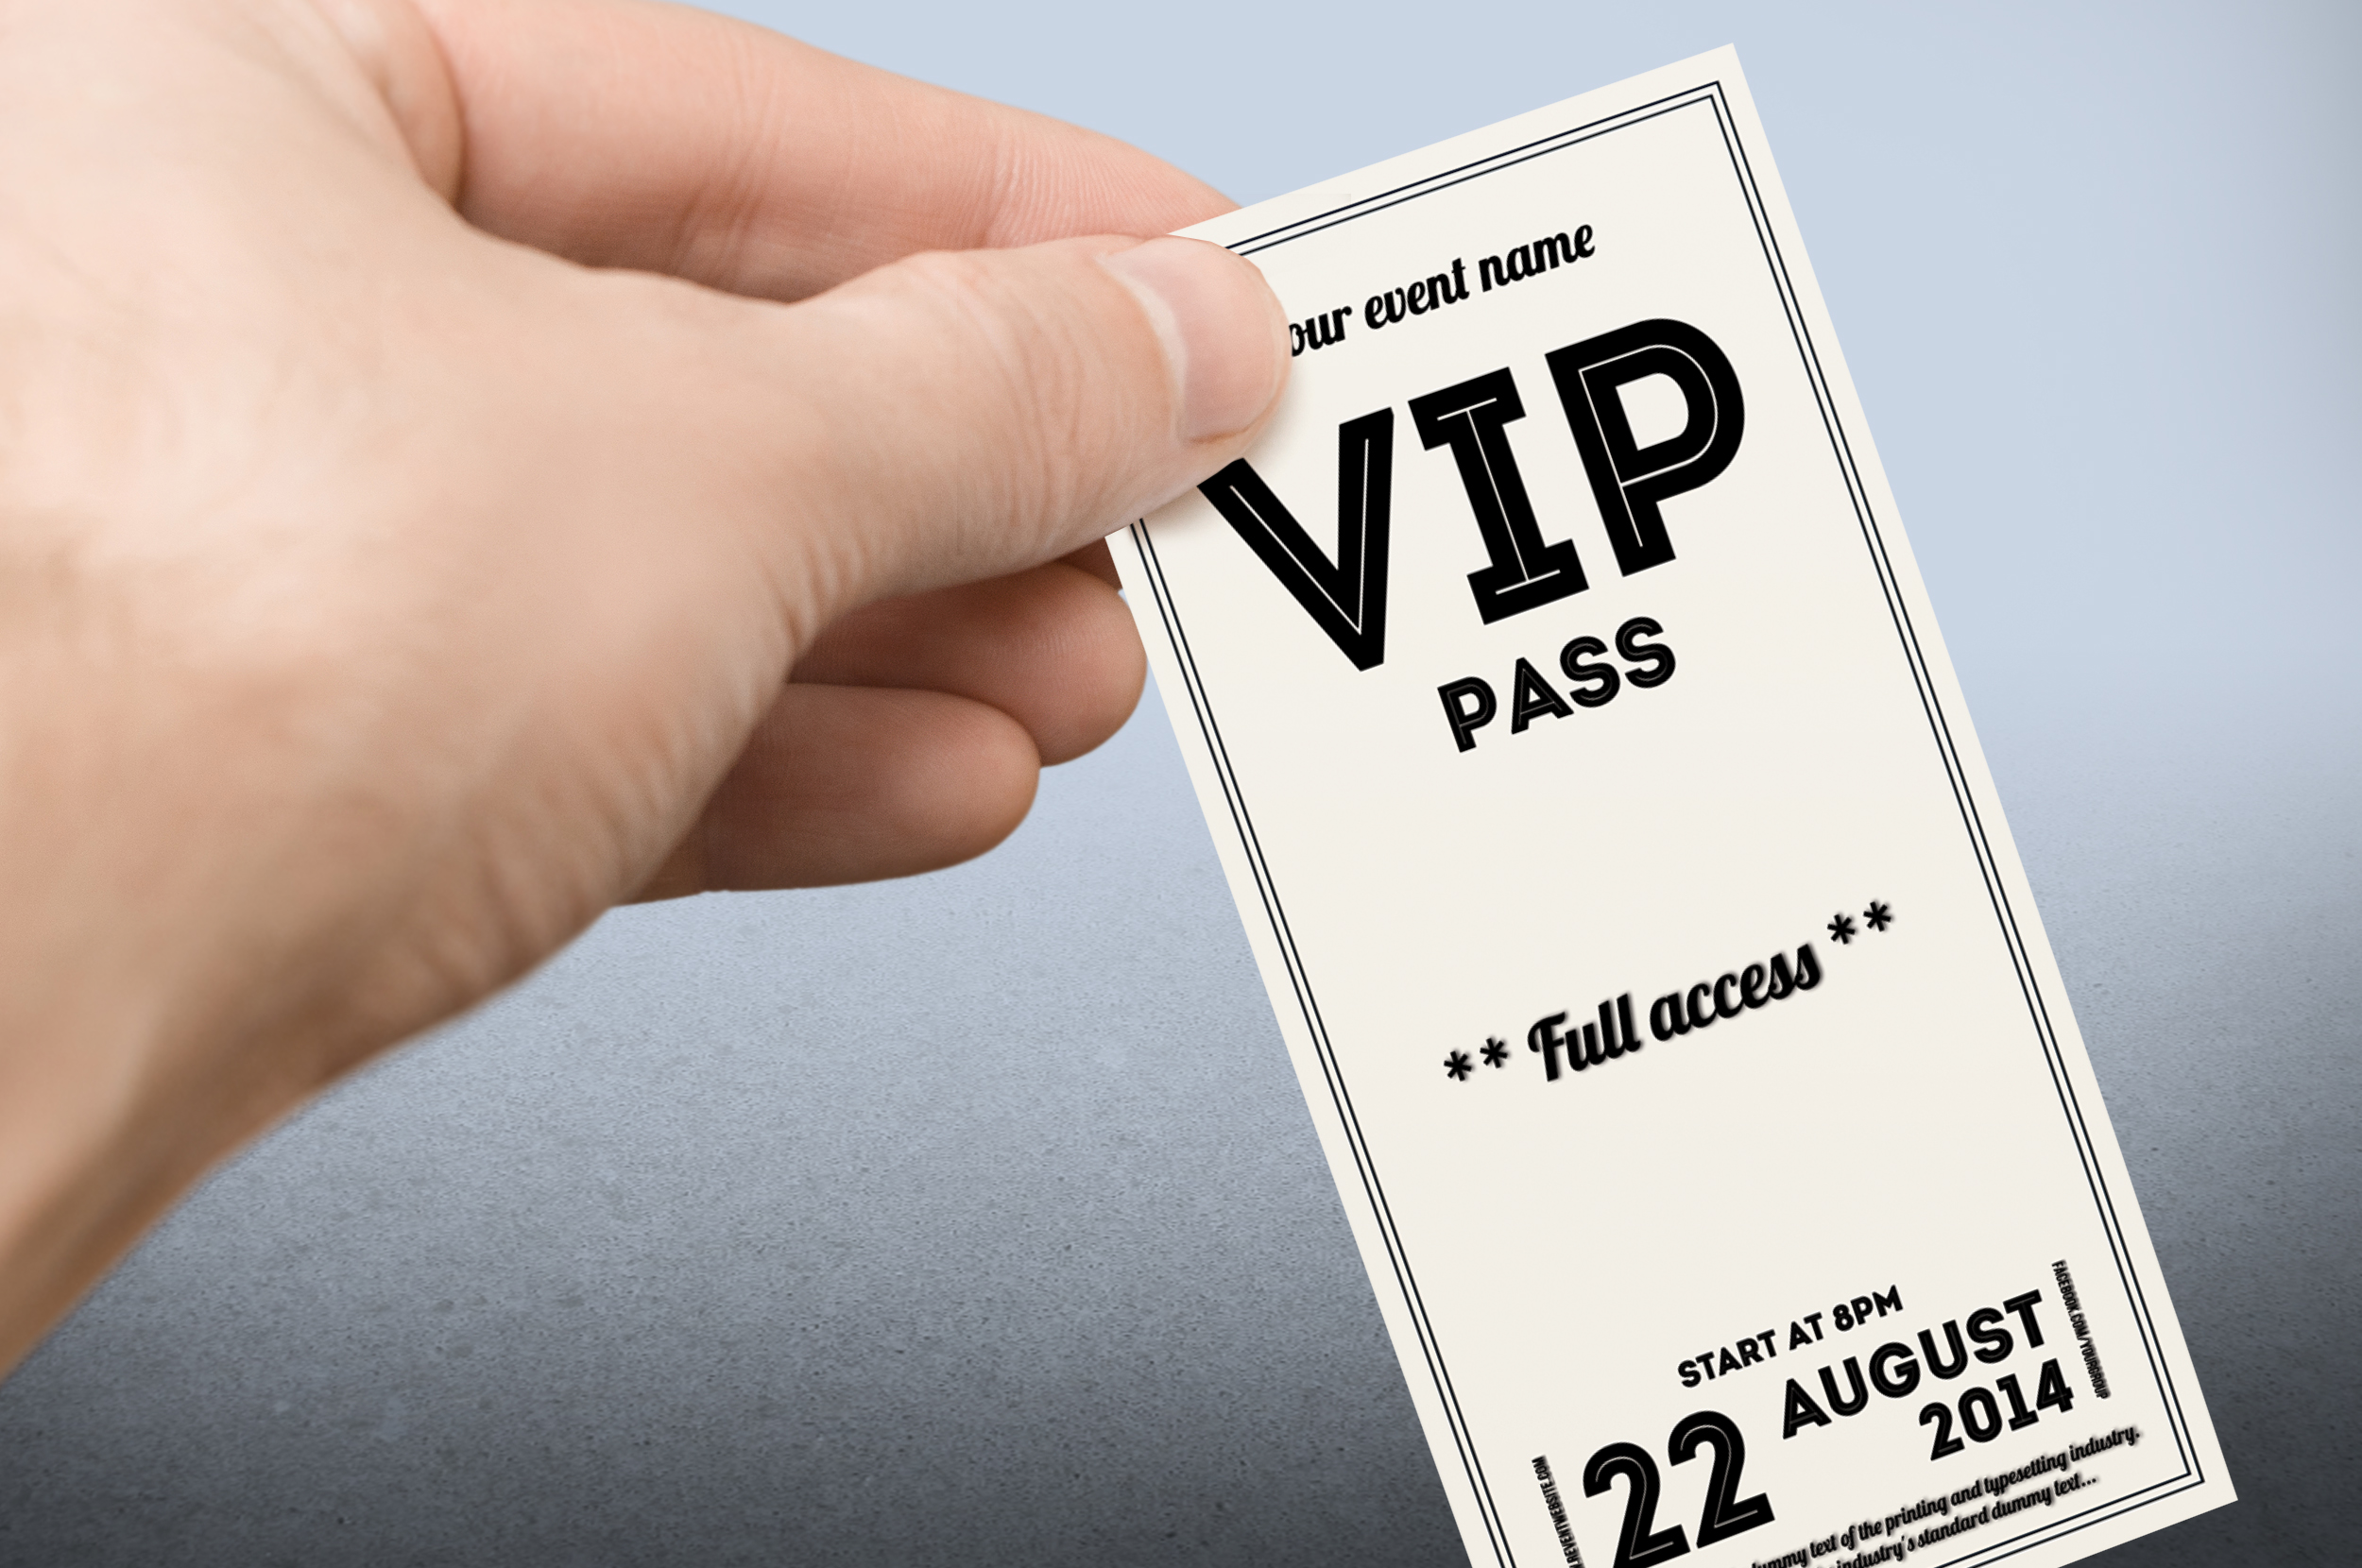 Download Clean retro style VIP PASS card ~ Card Templates on ...